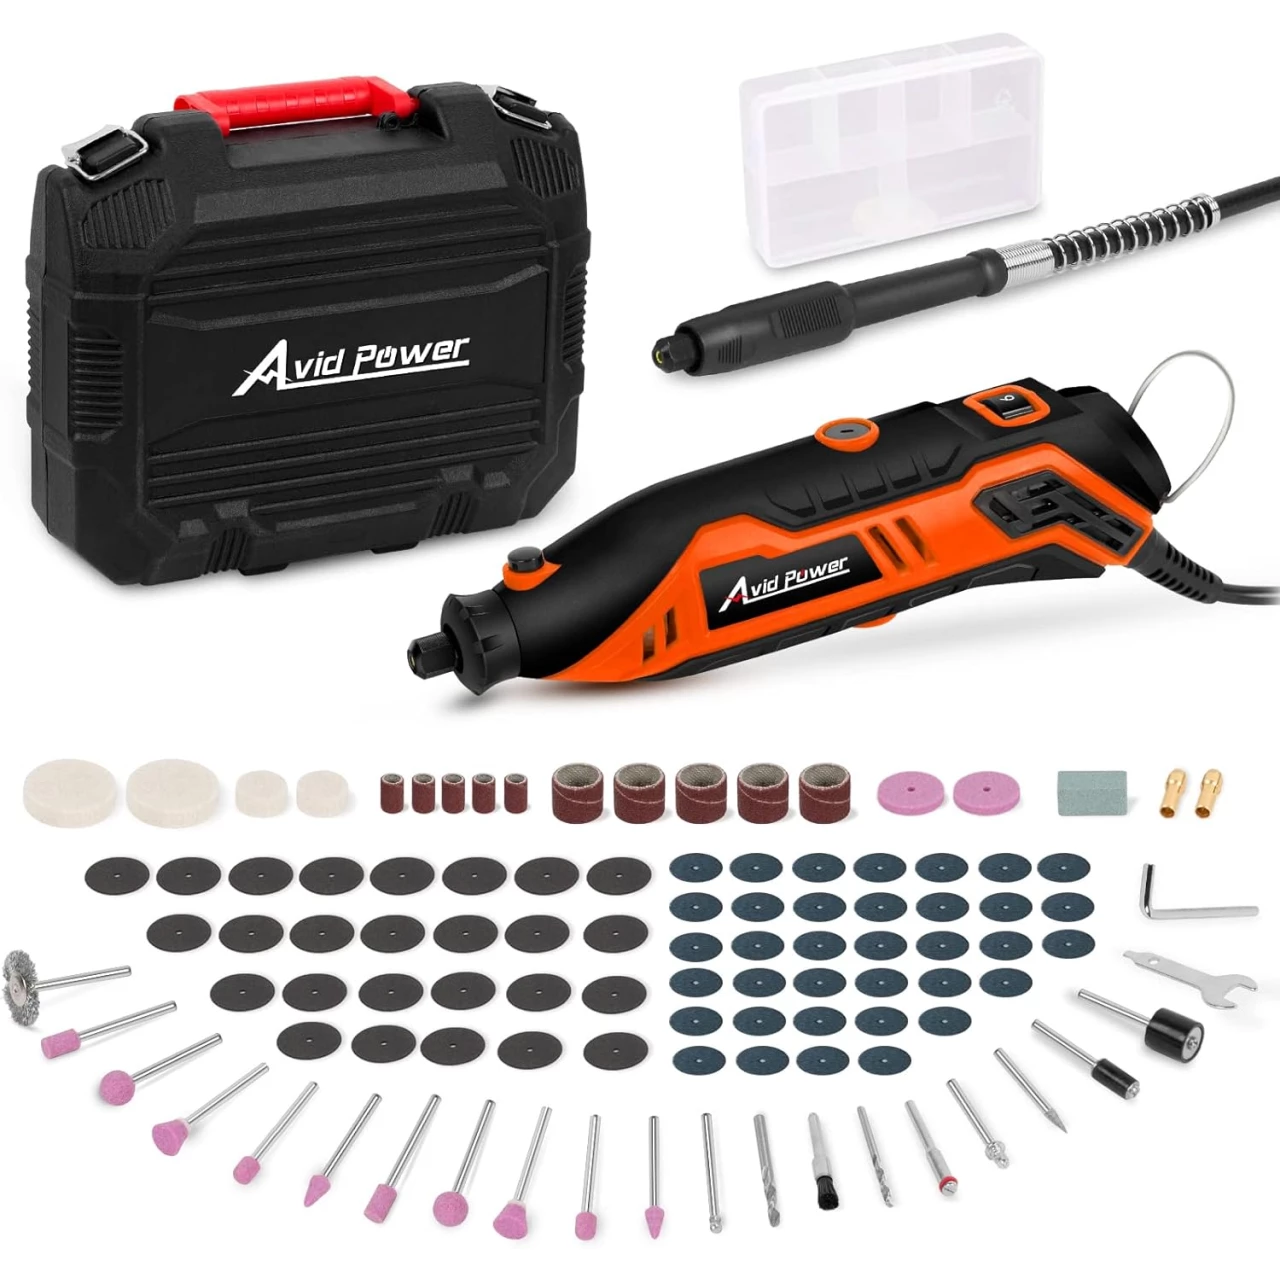 AVID POWER Rotary Tool with Flex Shaft 1.0 Amp Electric Rotary Tool, 6 Variable Speeds, 107 Pieces Rotary Tool Accessories &amp; Carrying Case for Grinding, Cutting, Carving and Sanding - Orange